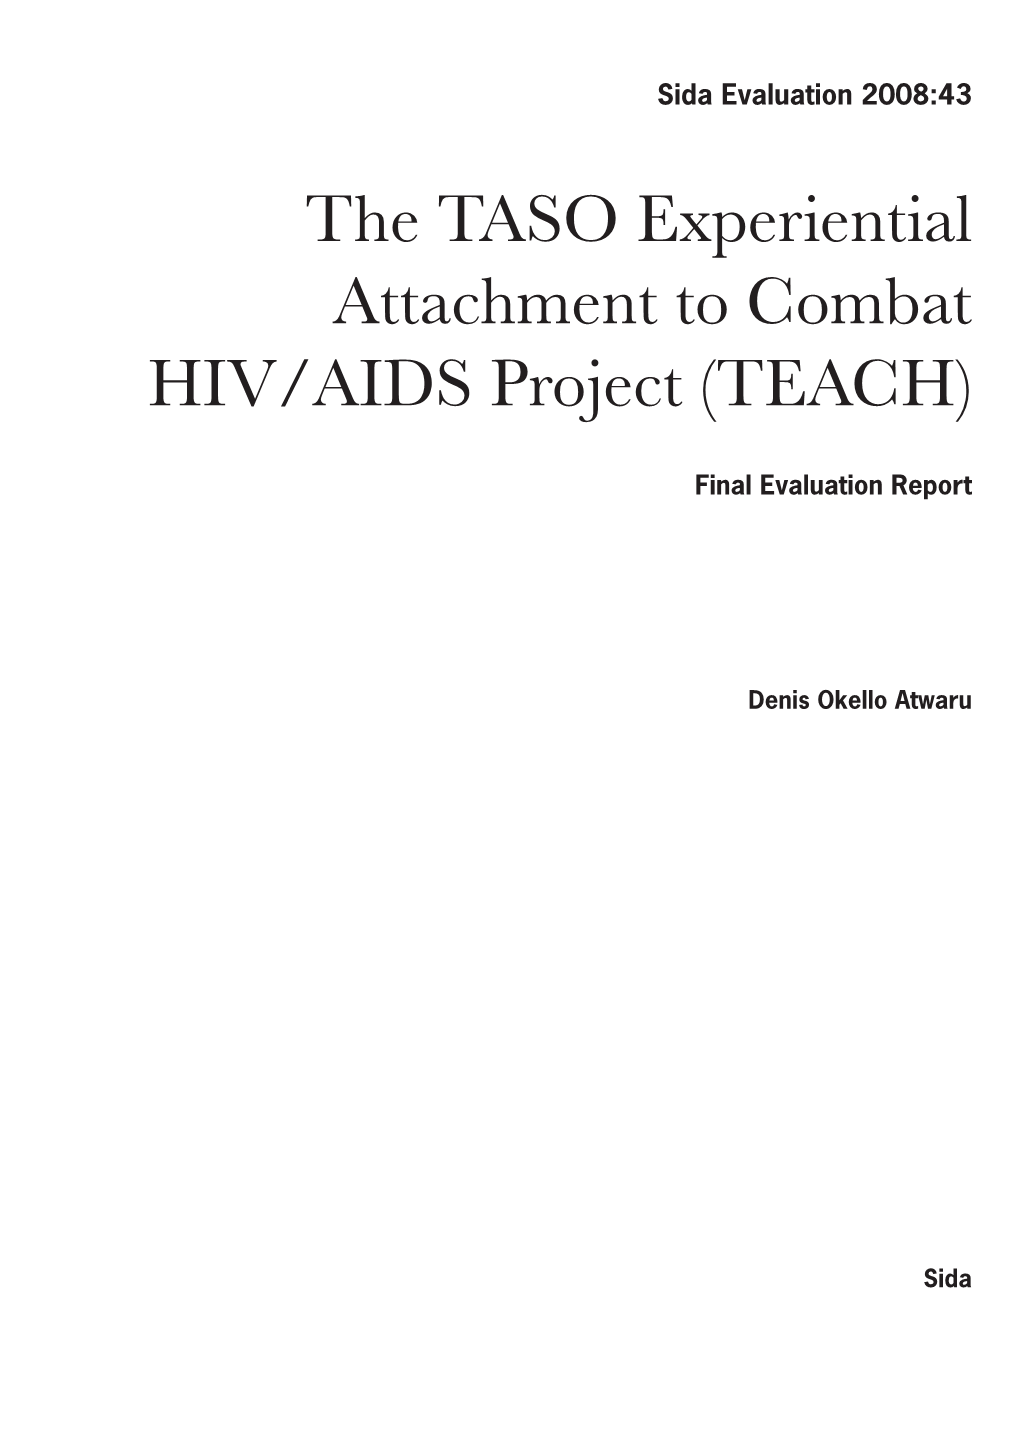 The TASO Experiential Attachment to Combat HIV/AIDS Project (TEACH)